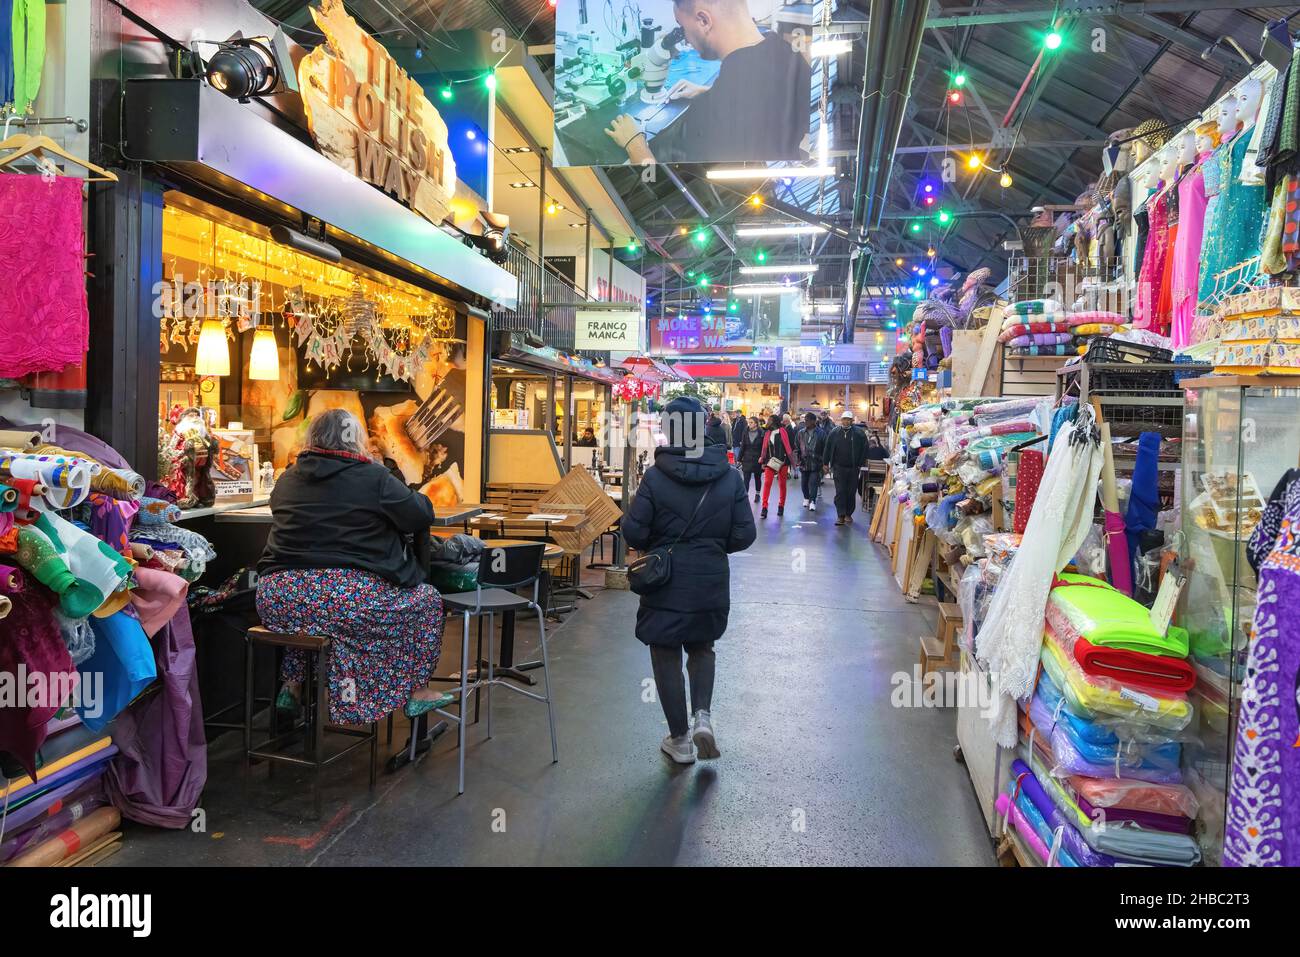 London markets; Tooting market - People shopping in the indoor market in Tooting Bec, London SW17, London UK; example of city lifestyle, England Stock Photo